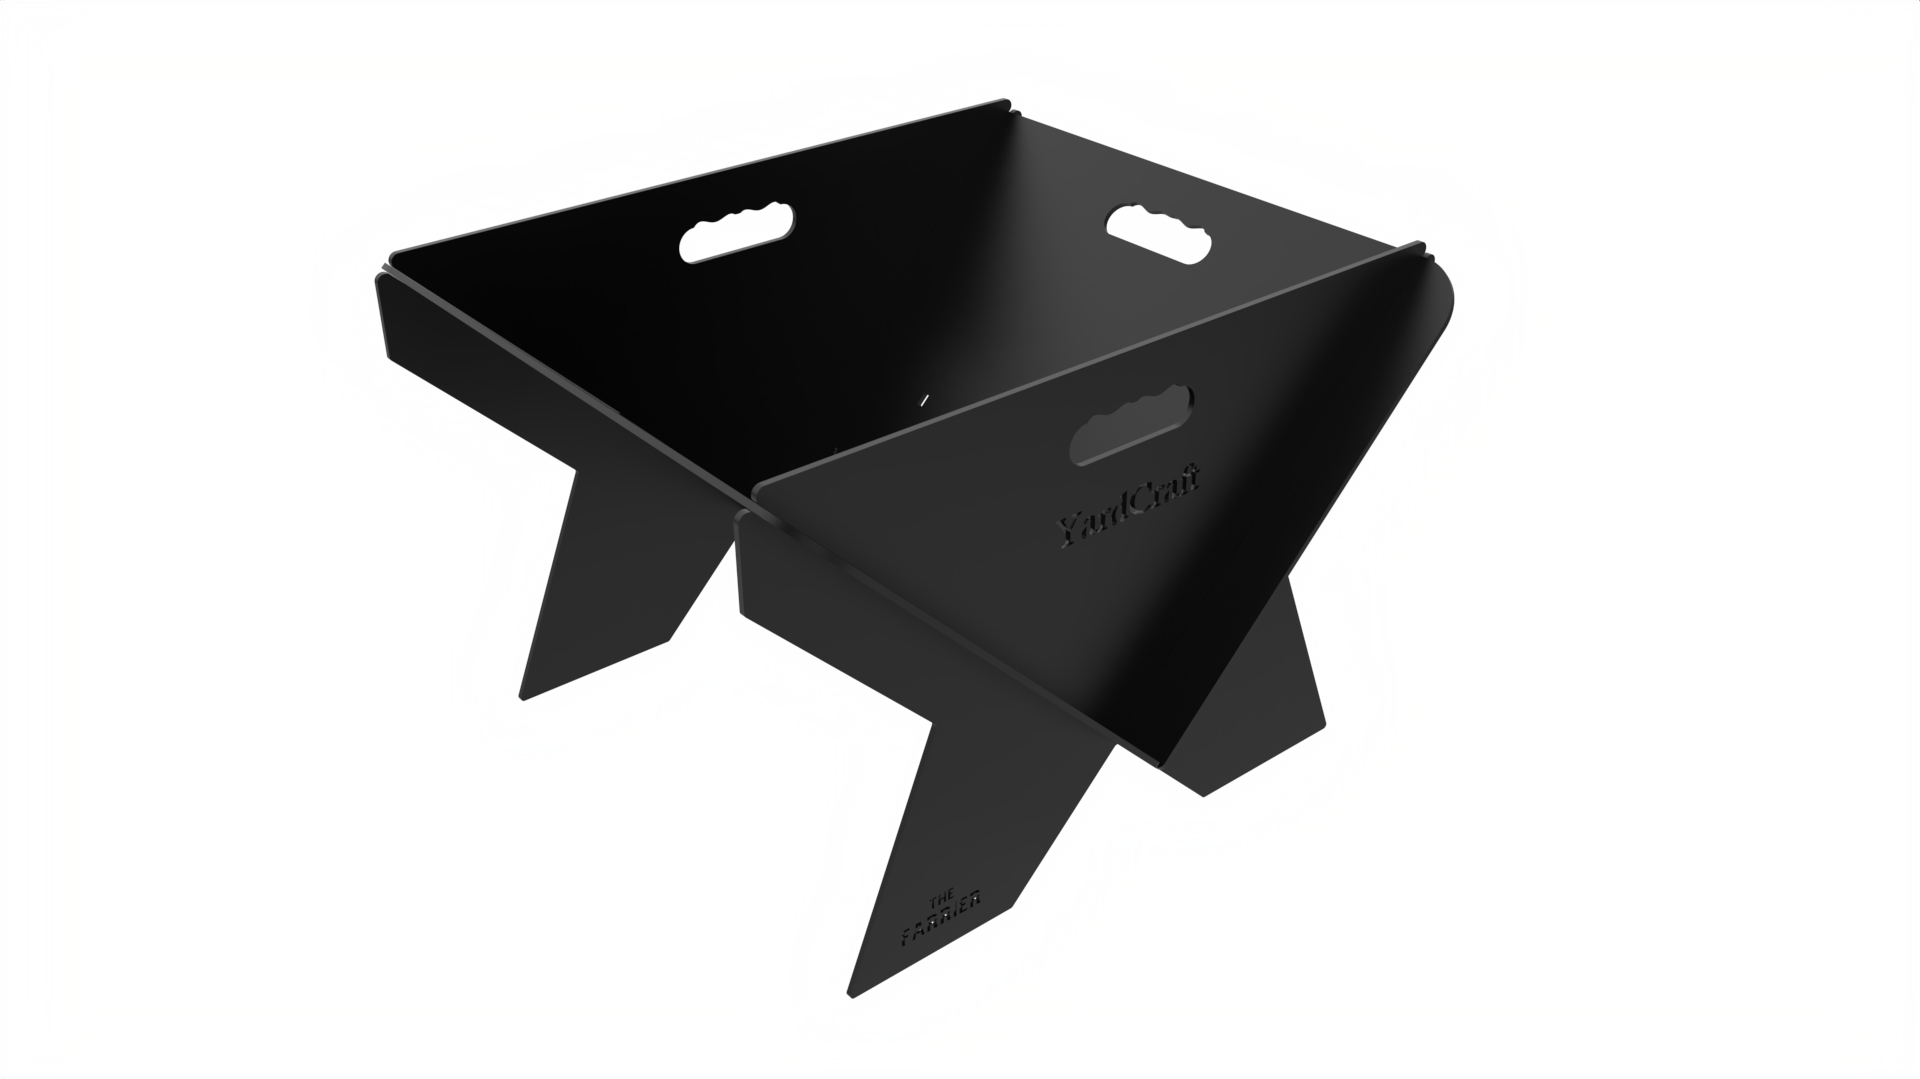 The Farrier™ Collapsible Fire Pit in Black.